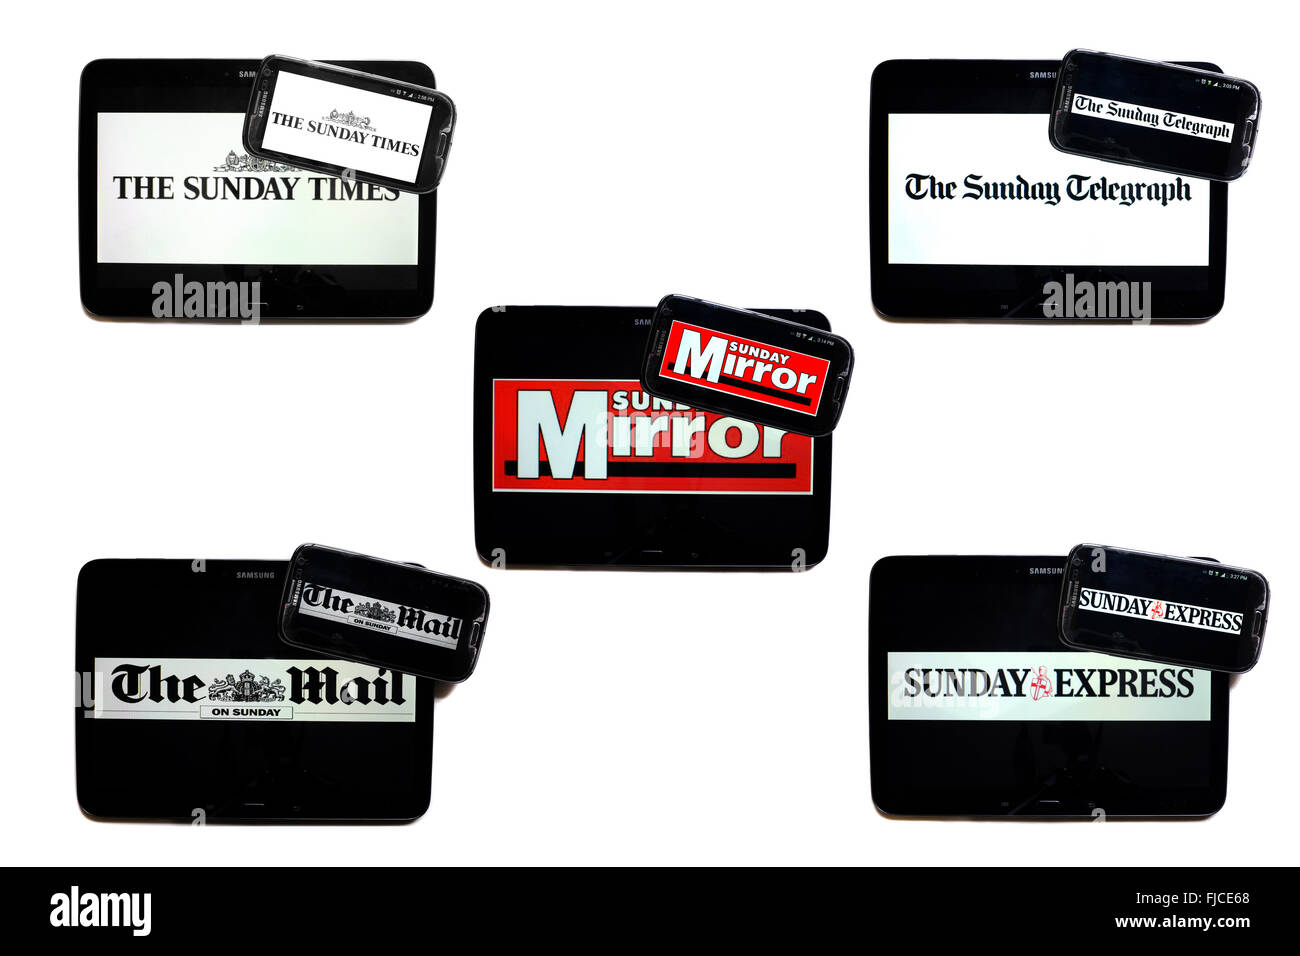 Sunday newspaper logos displayed on tablet and smartphone screens against a white background. Stock Photo